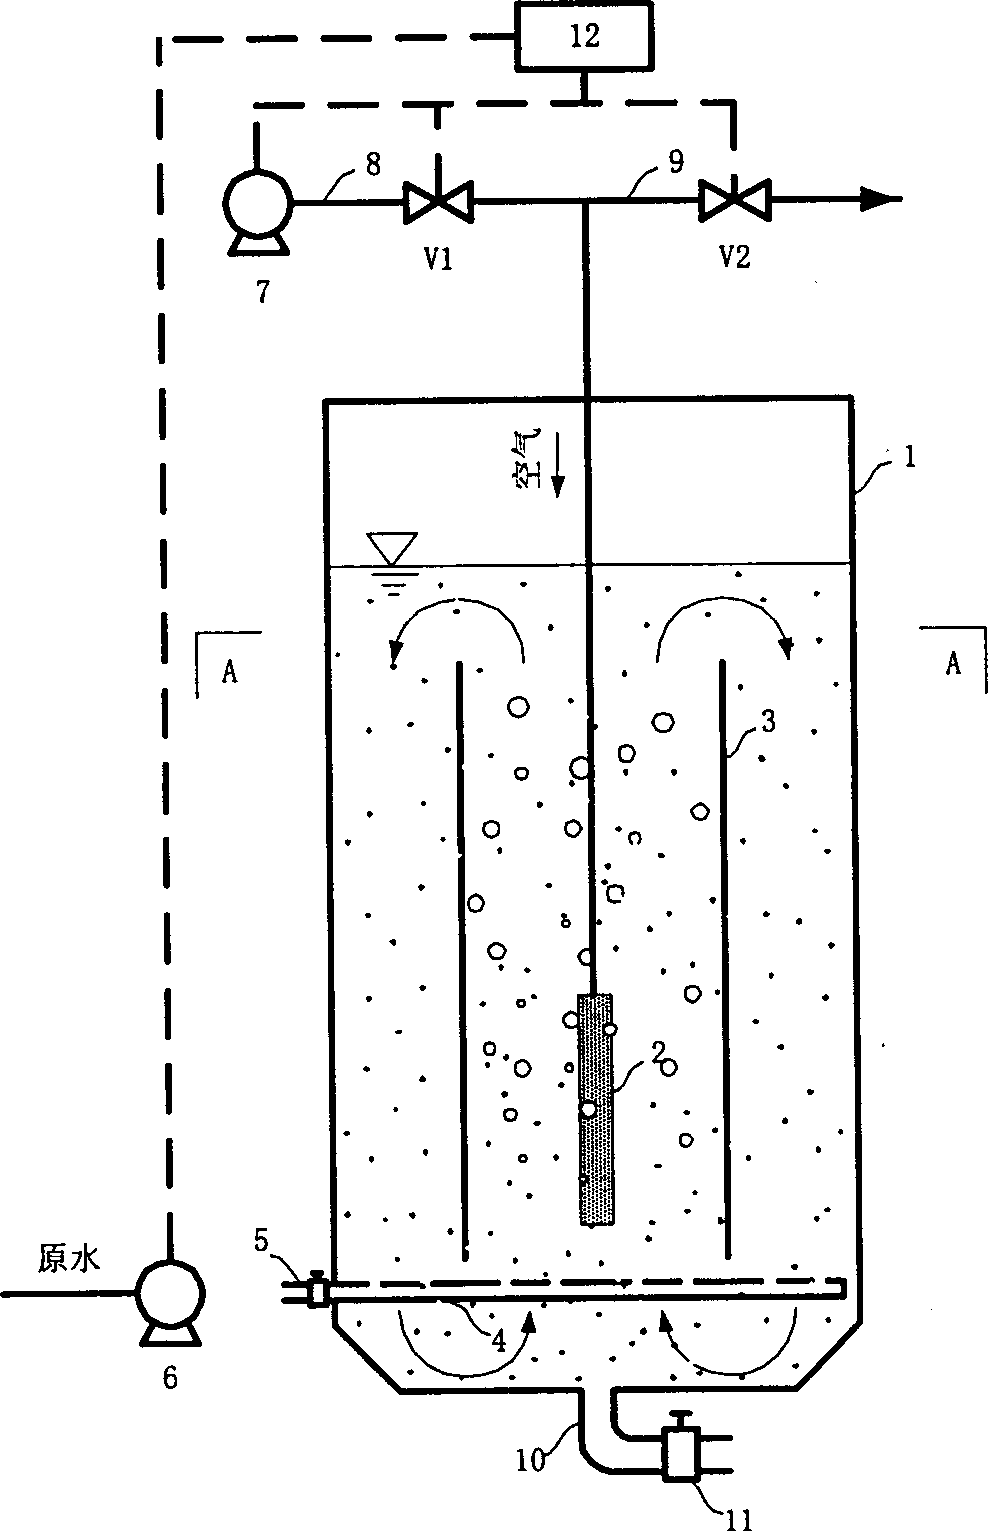 Process and apparatus for wastewater by batched membrane-bioreactor